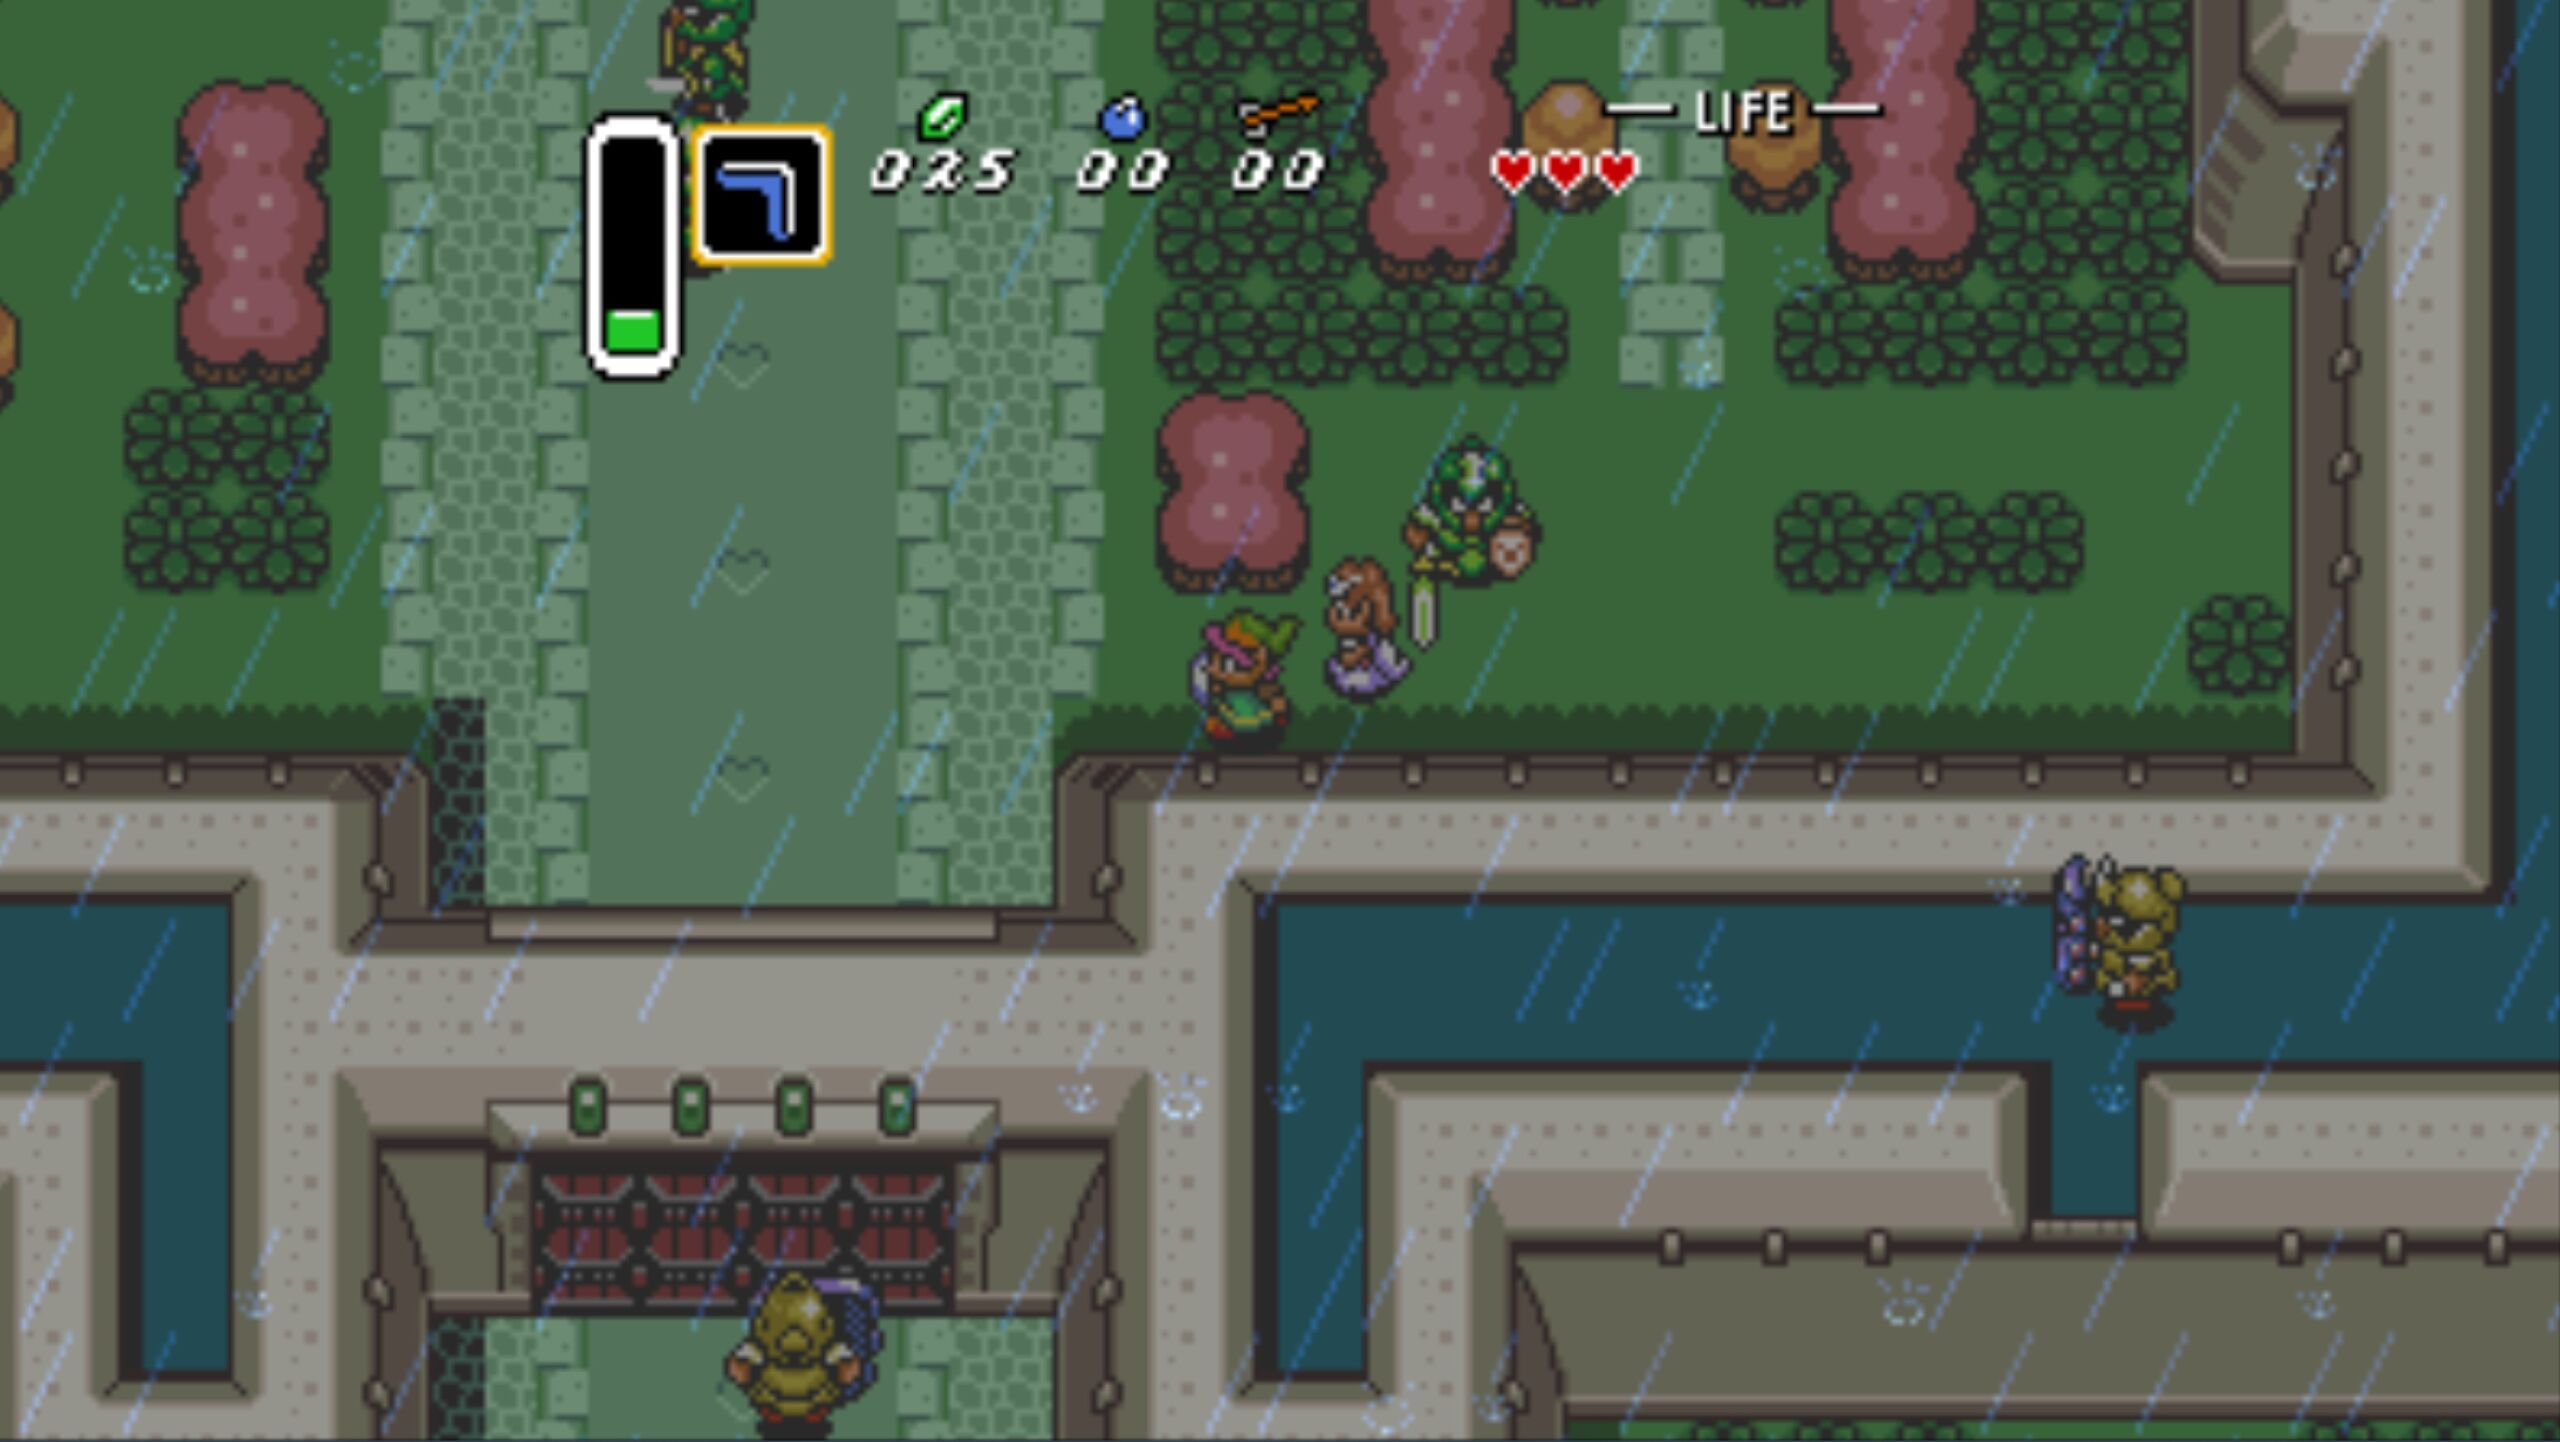 The Legend of Zelda - A Link to the Past (Nintendo Switch port)